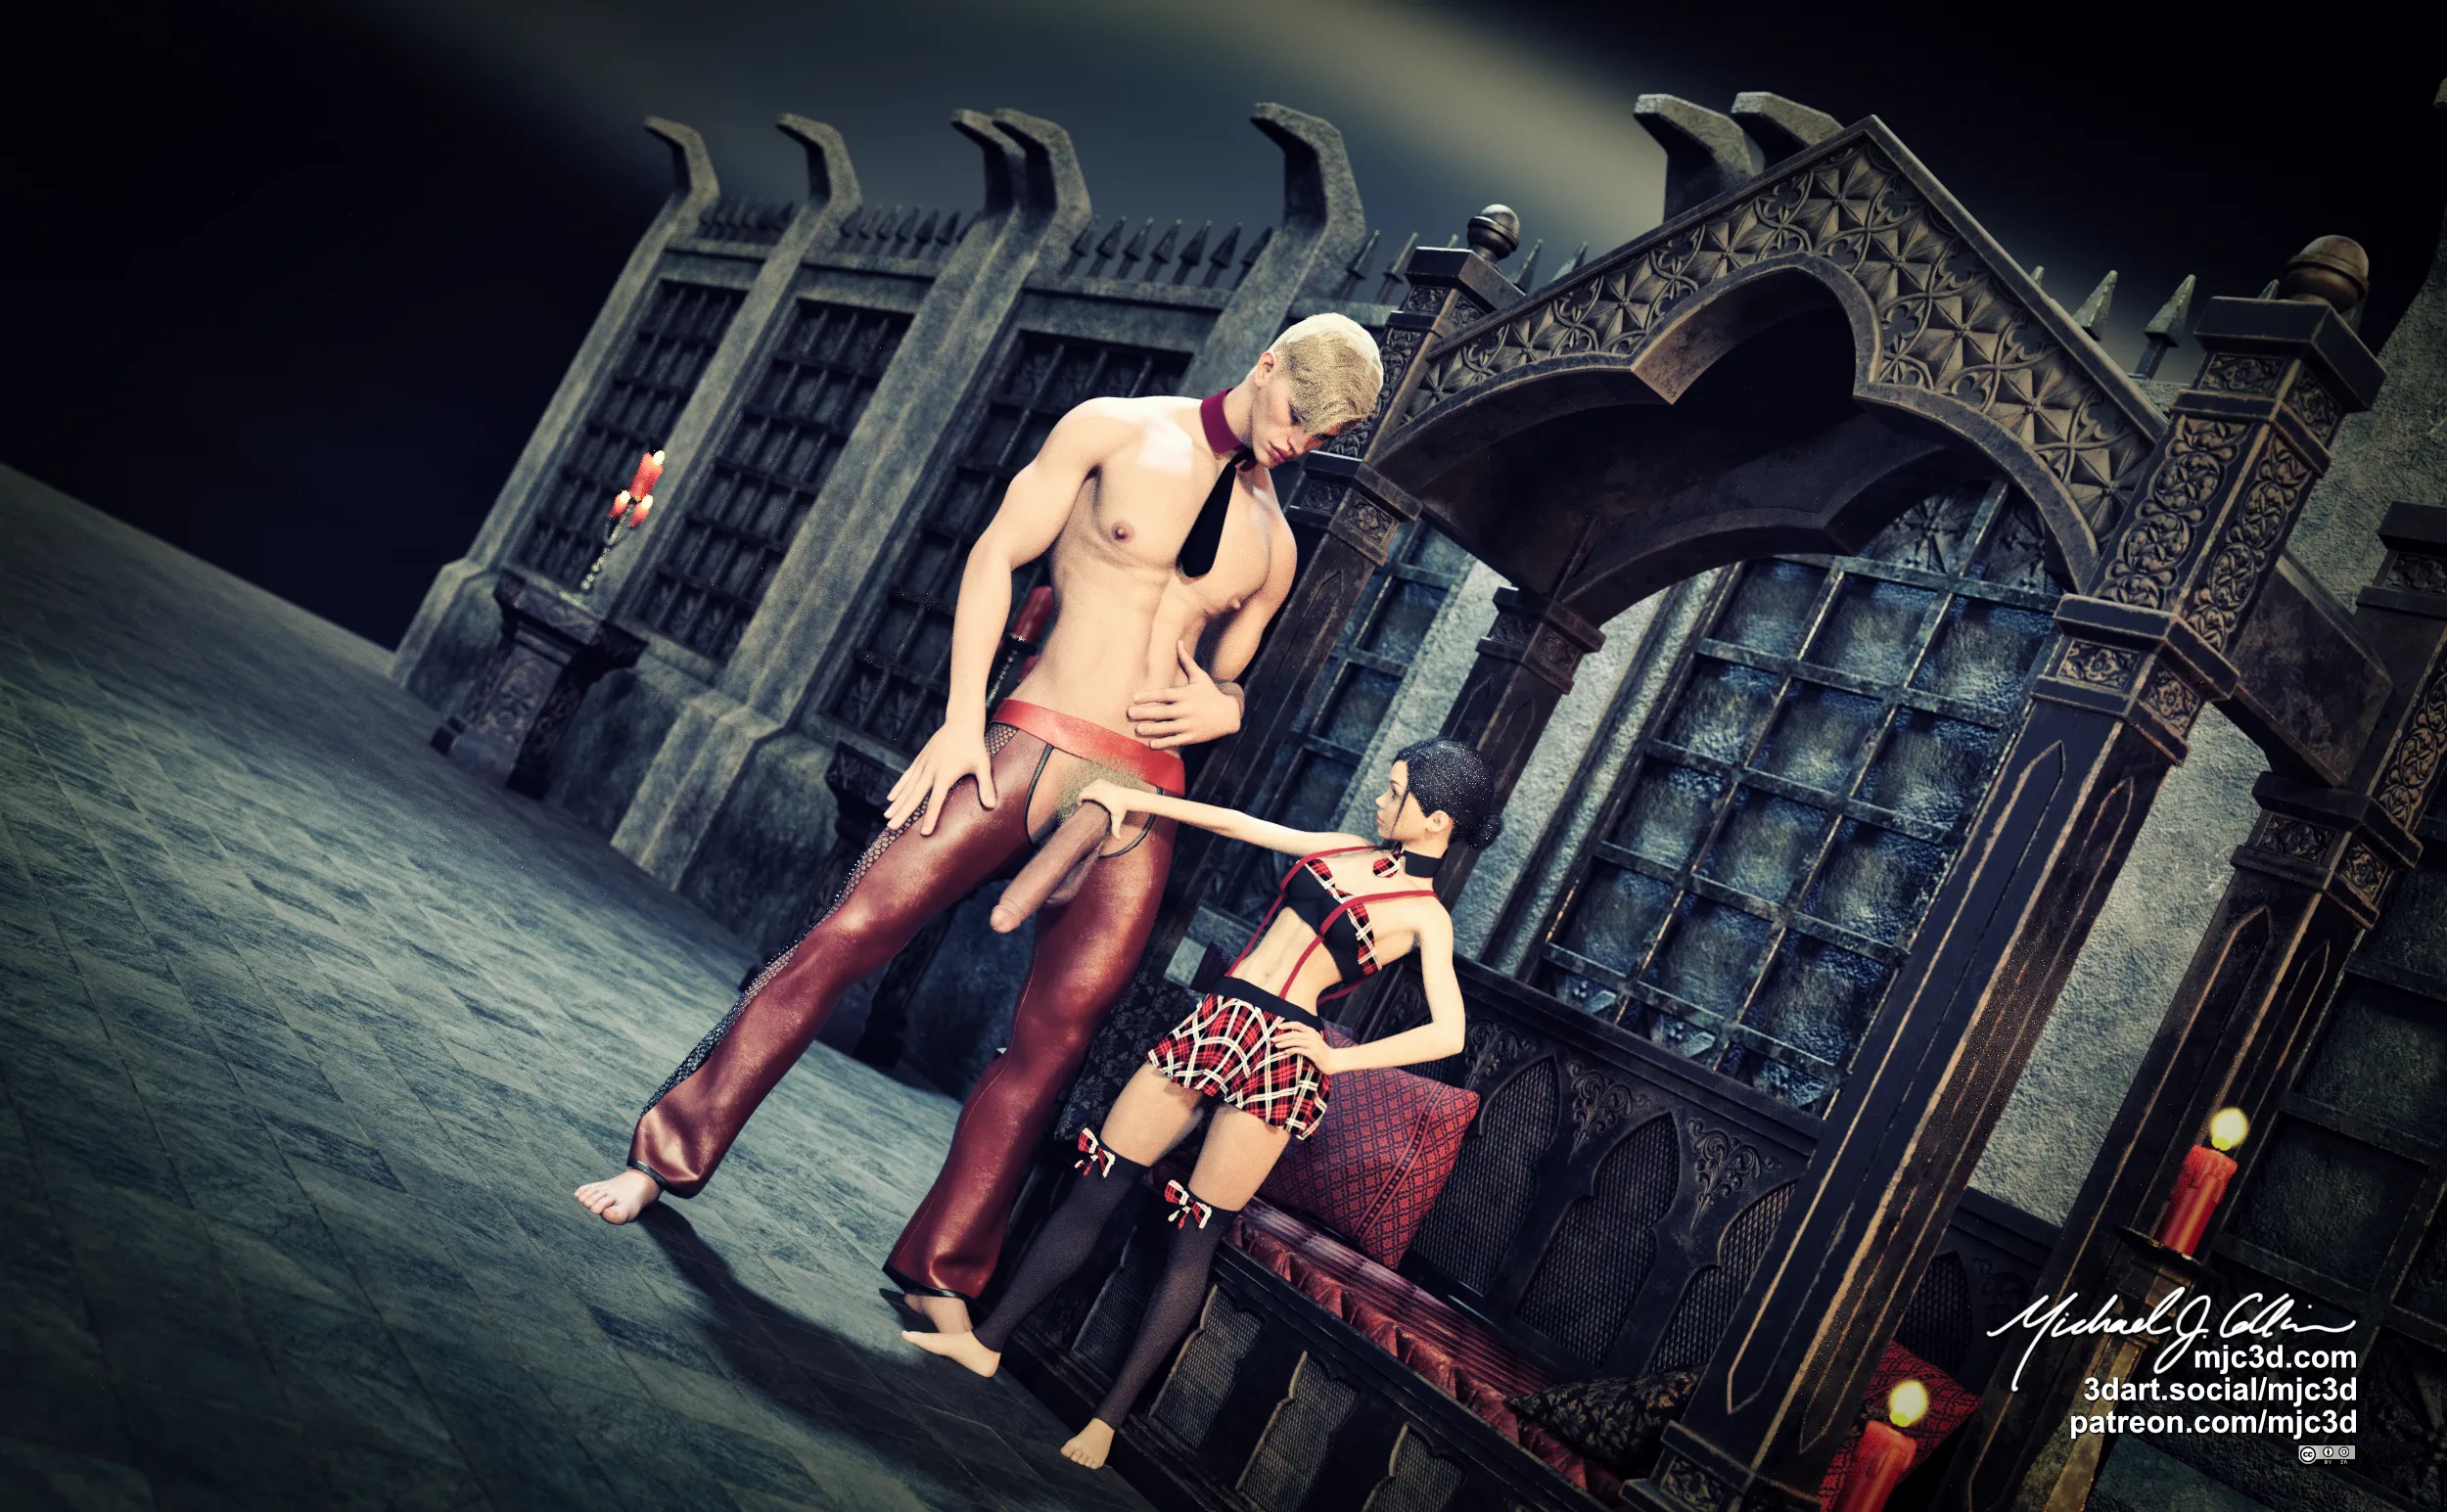 A tall, slender, well-built man, with blonde hair is standing in a studio in front of dark gothic furniture and walls. Severaĺ red, lit candles illuminate the scene. He is wearing a red collar and black tie but there is no shirt. He is also wearing red leather chaps and has his right hand on his thigh and left hand on his lower abdomen. A short, petite, young woman wearing a red & black gothic collar, top, suspenders, and skirt is standing slightly askew to him. Her right hand is outstretched and she is gripping the base of his rather long and thick shaft that is hanging beneath a thick tuft of blonde pubic hair.